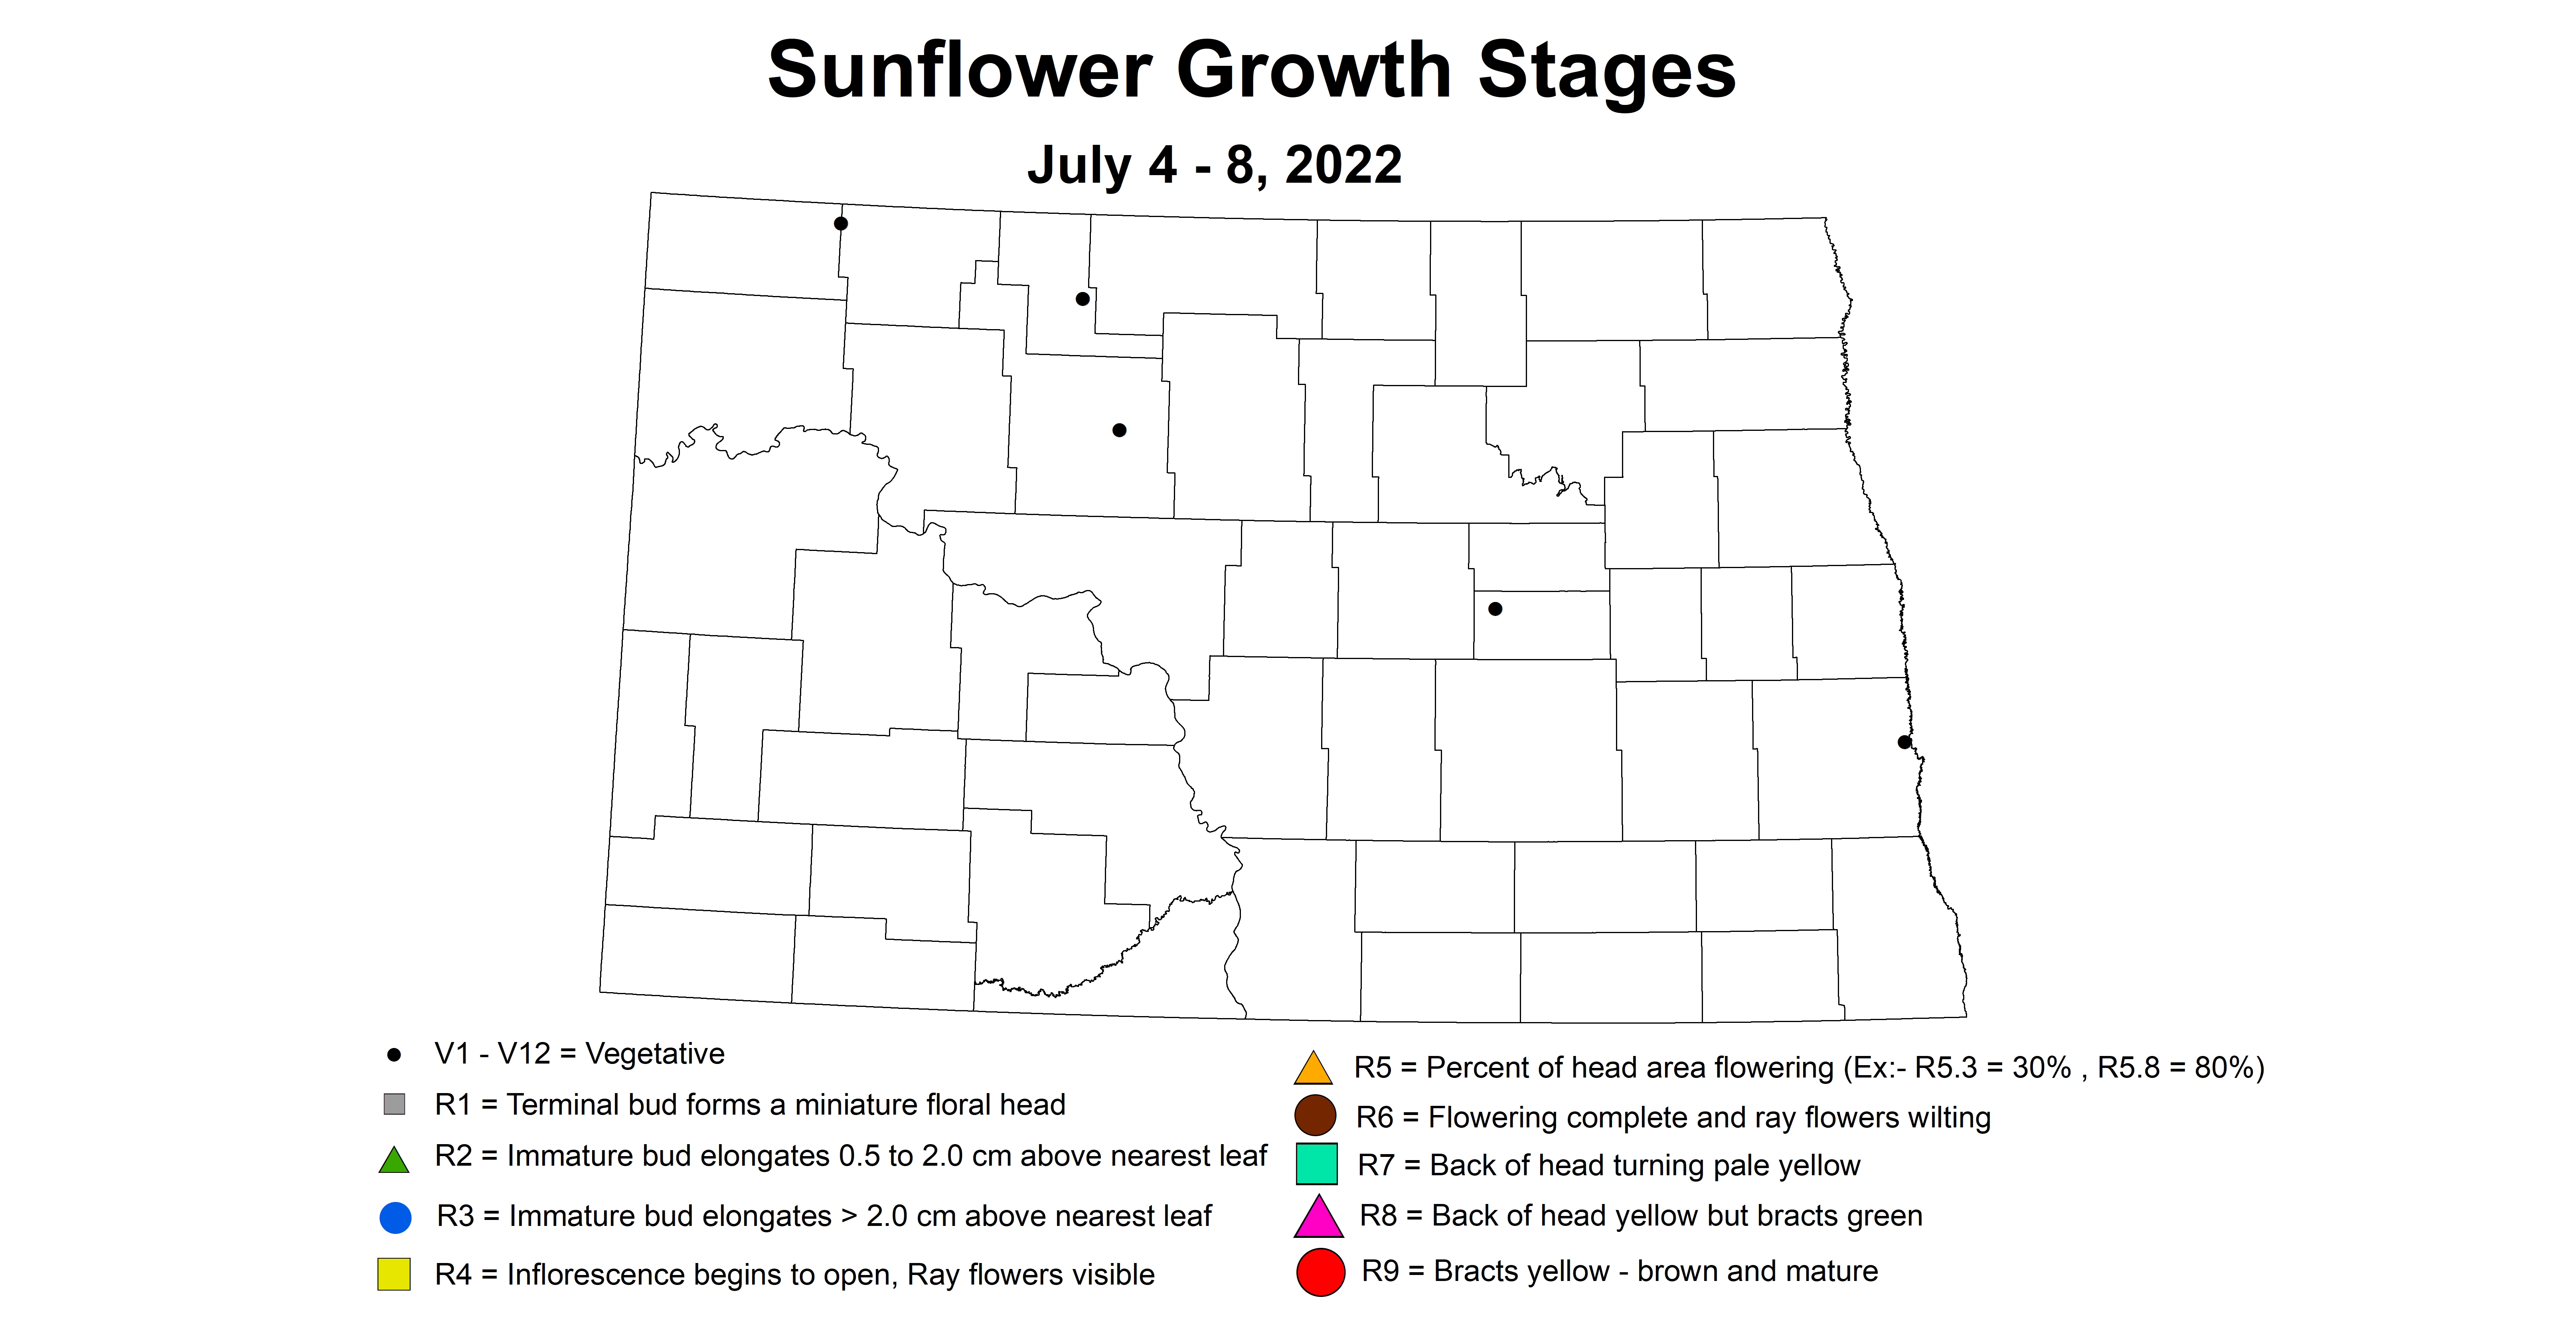 ND IPM Map of sunflower growth stages July 4-8,2022